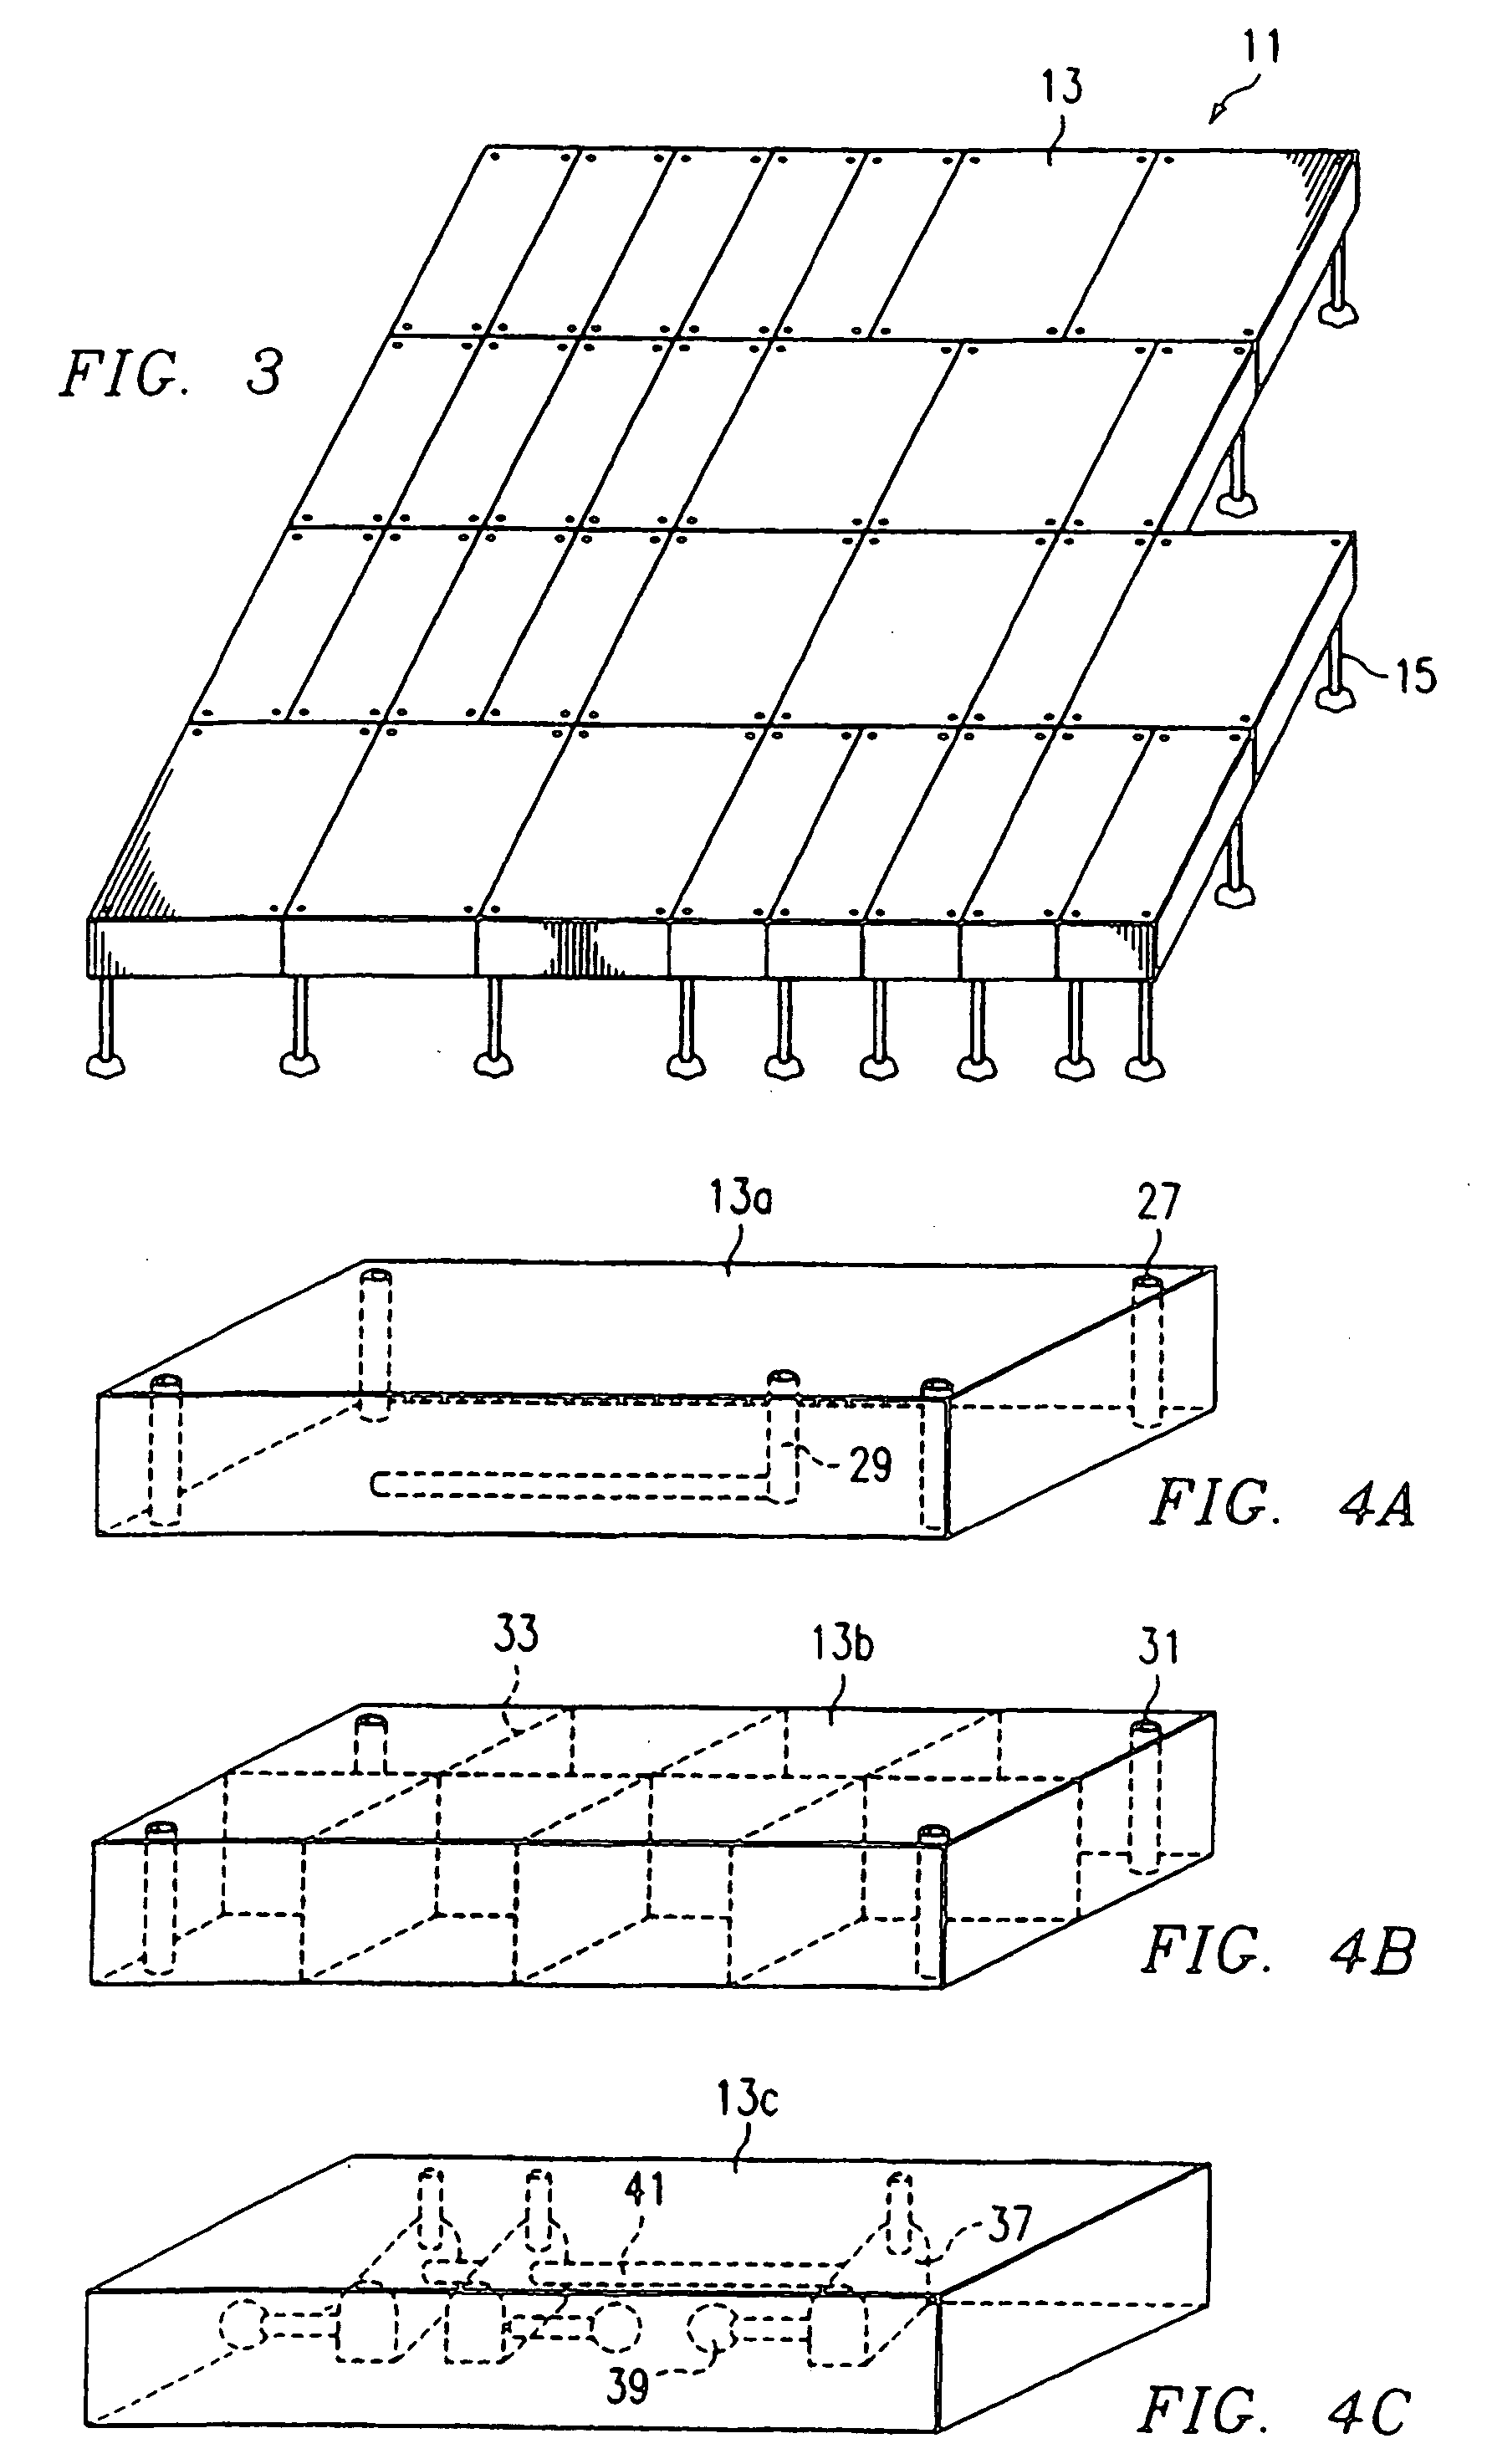 Method and system for building modular structures from which oil and gas wells are drilled